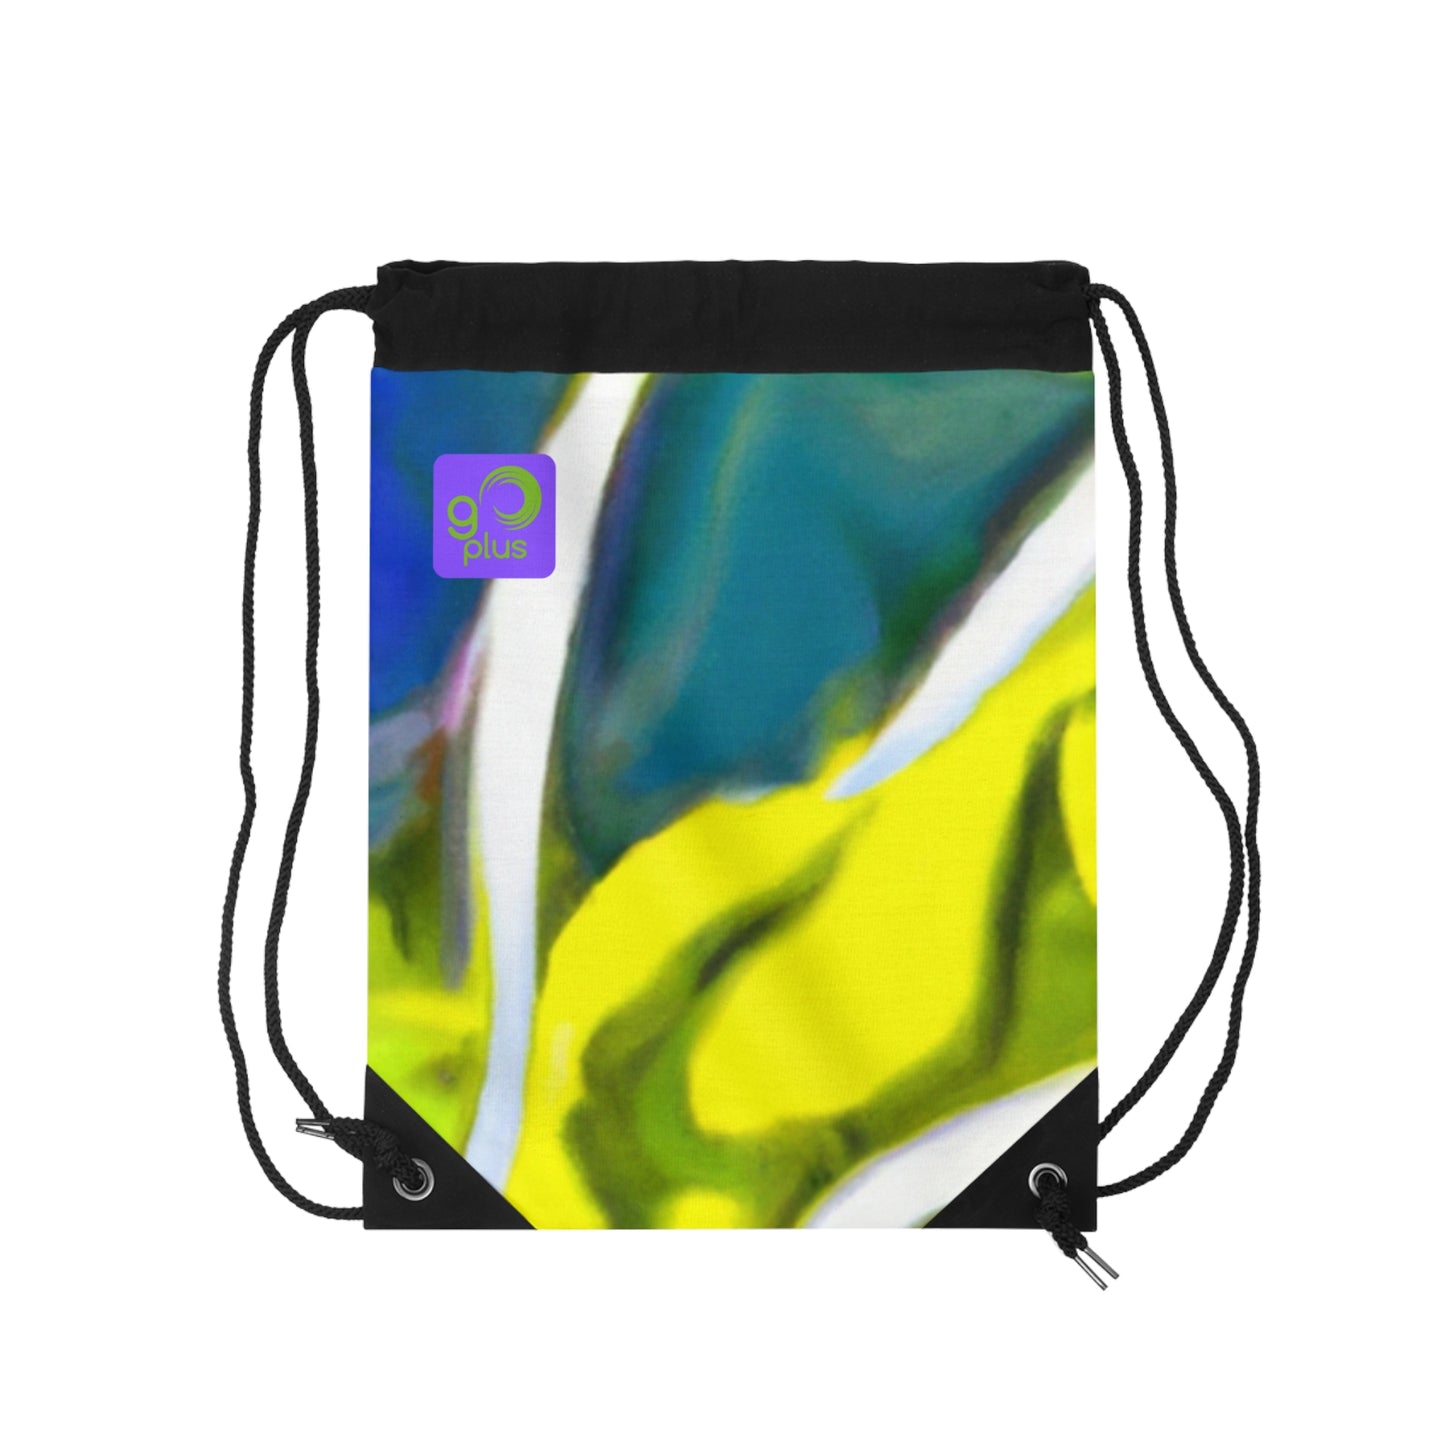 "Athletic Energy Unleashed: A Celebration of Physical Achievement in Explosive Color" - Go Plus Drawstring Bag